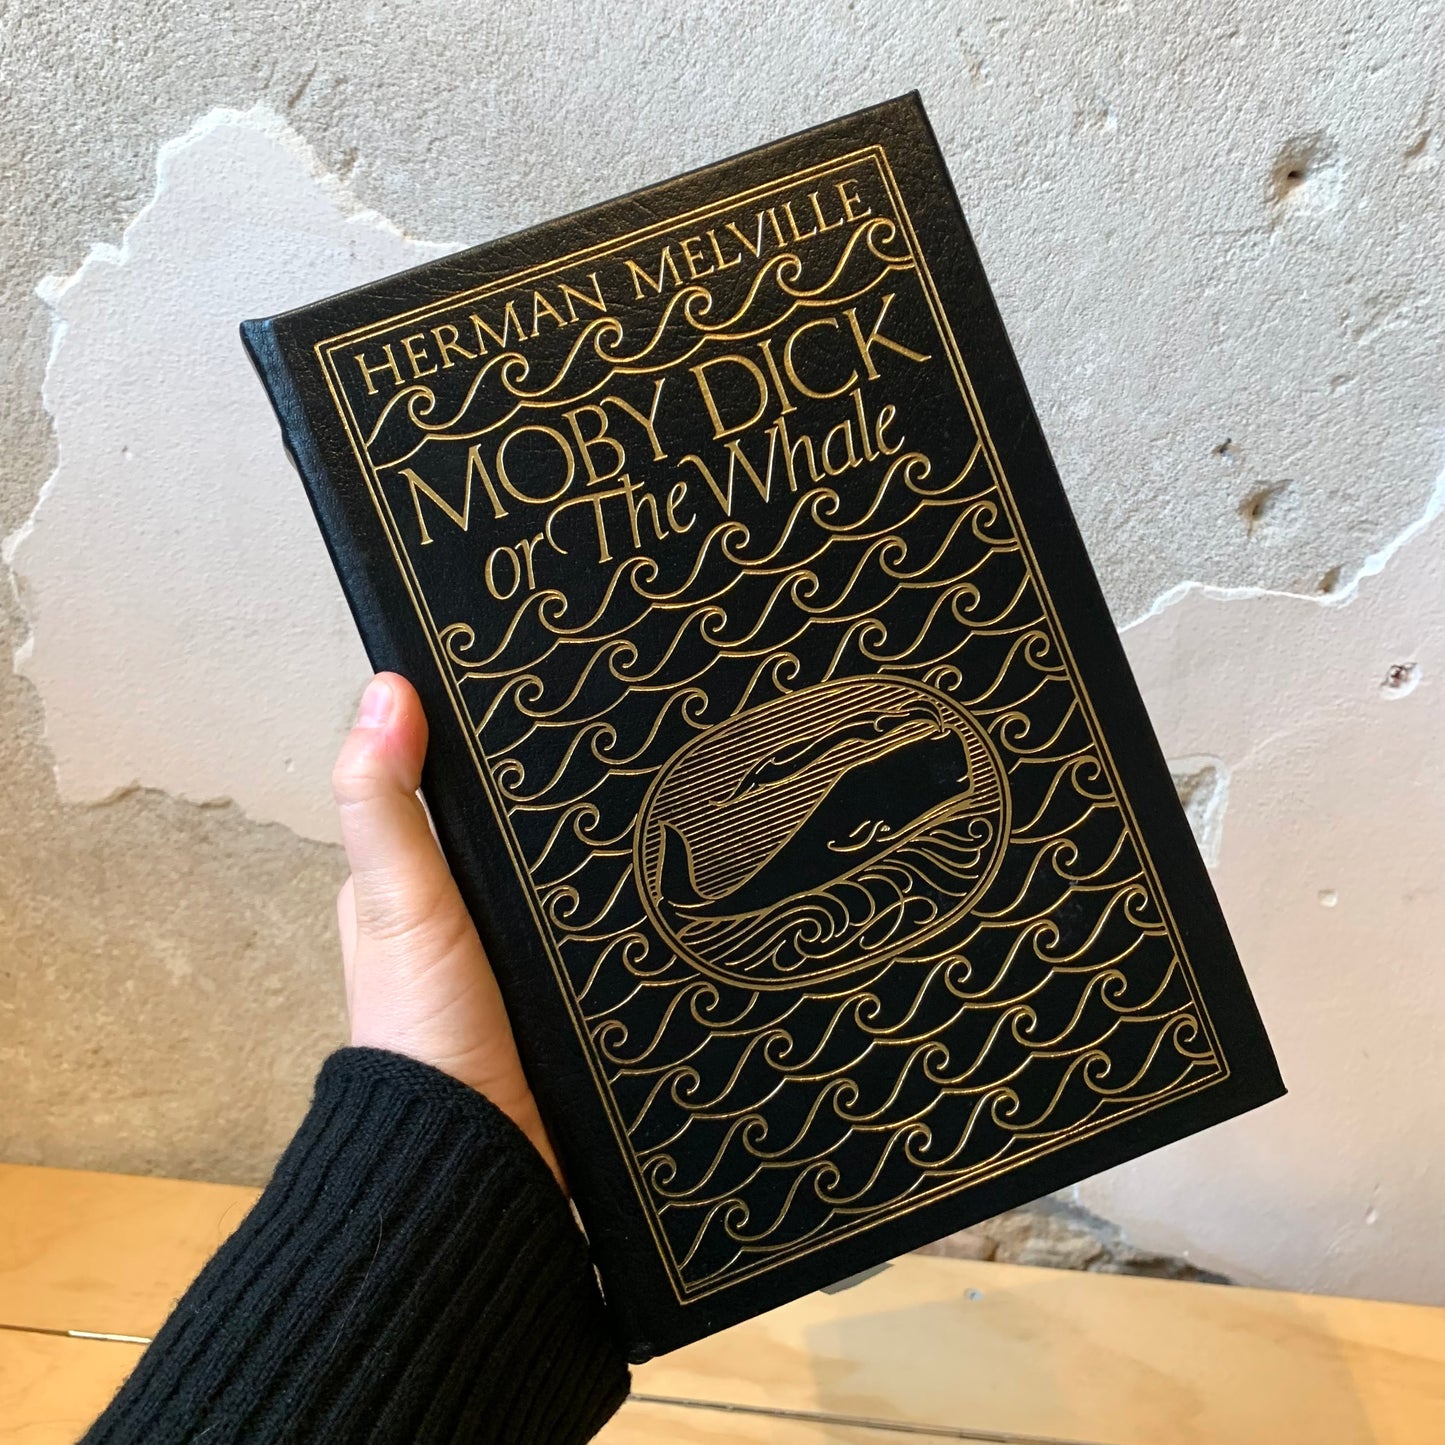 Moby Dick The Whale – Herman Melville